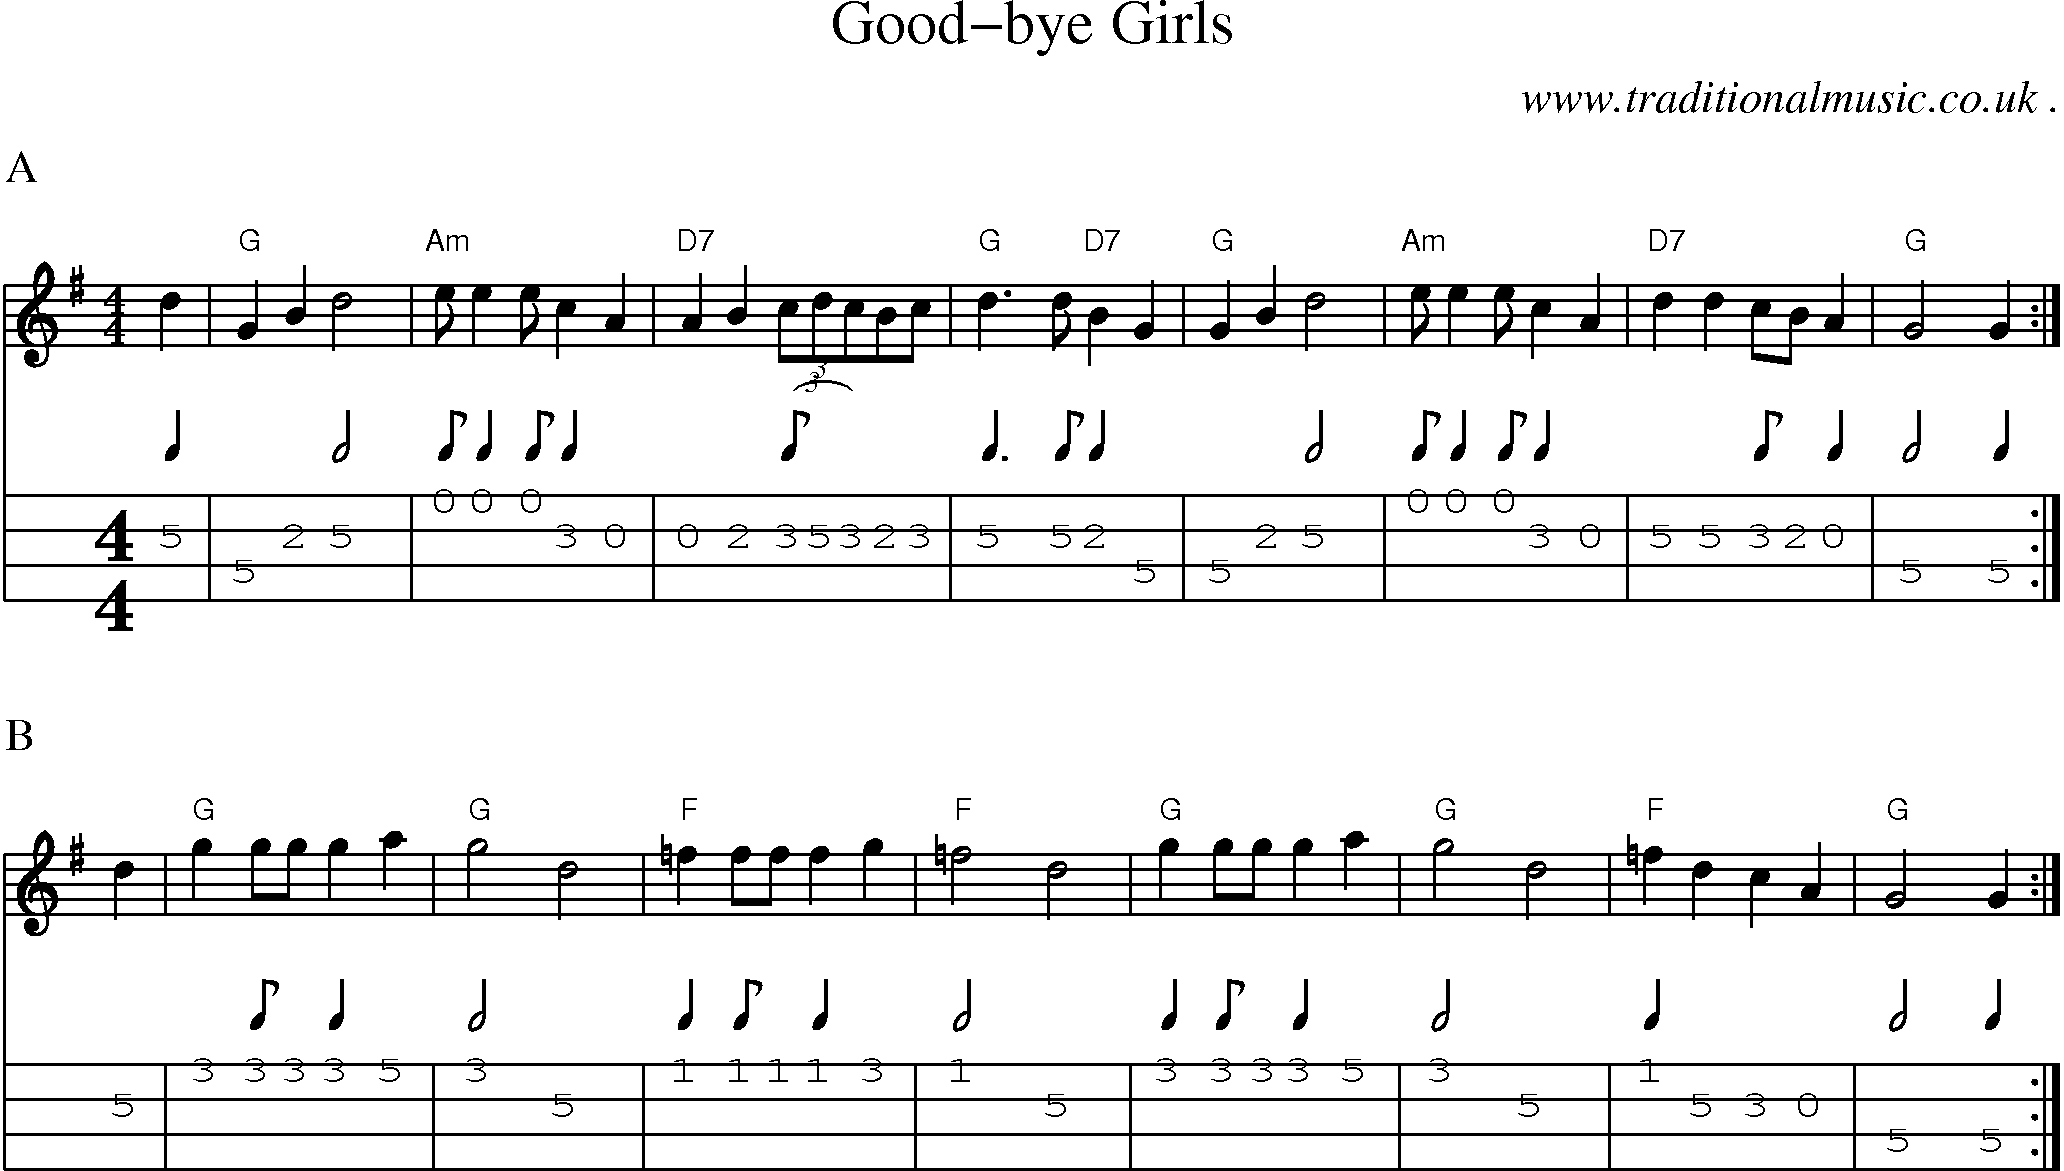 Music Score and Guitar Tabs for Good-bye Girls